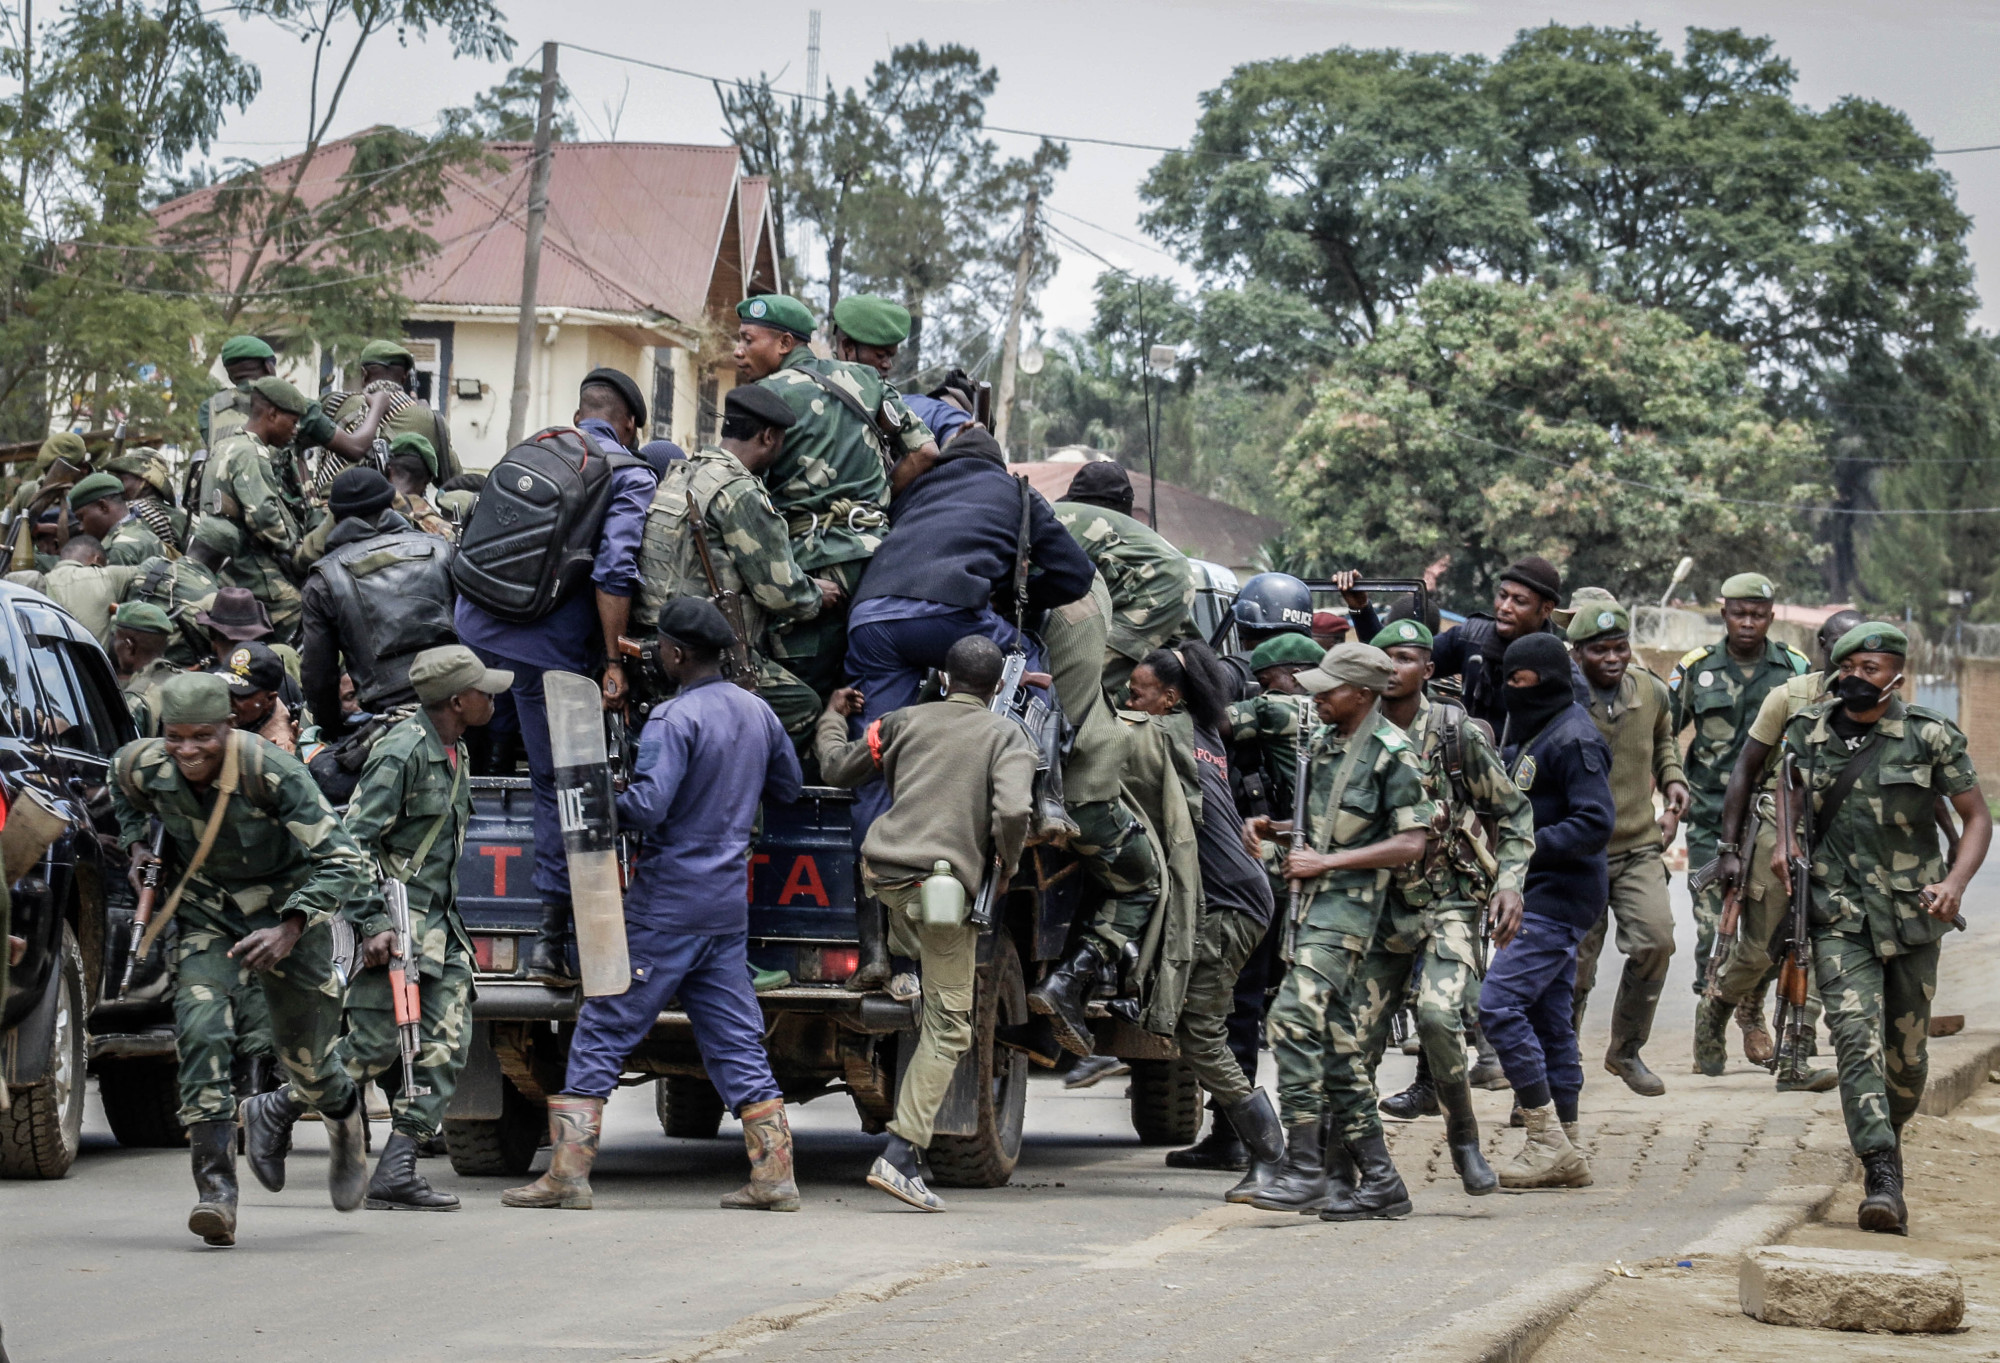 Bunia, DRC, September 4, 2020. Government soldiers and police reacted as about 100 heavily armed fighters from the CODECO militia entered the eastern Congolese city of Bunia last Friday. © Dieudonné Dirole for Fondation Carmignac